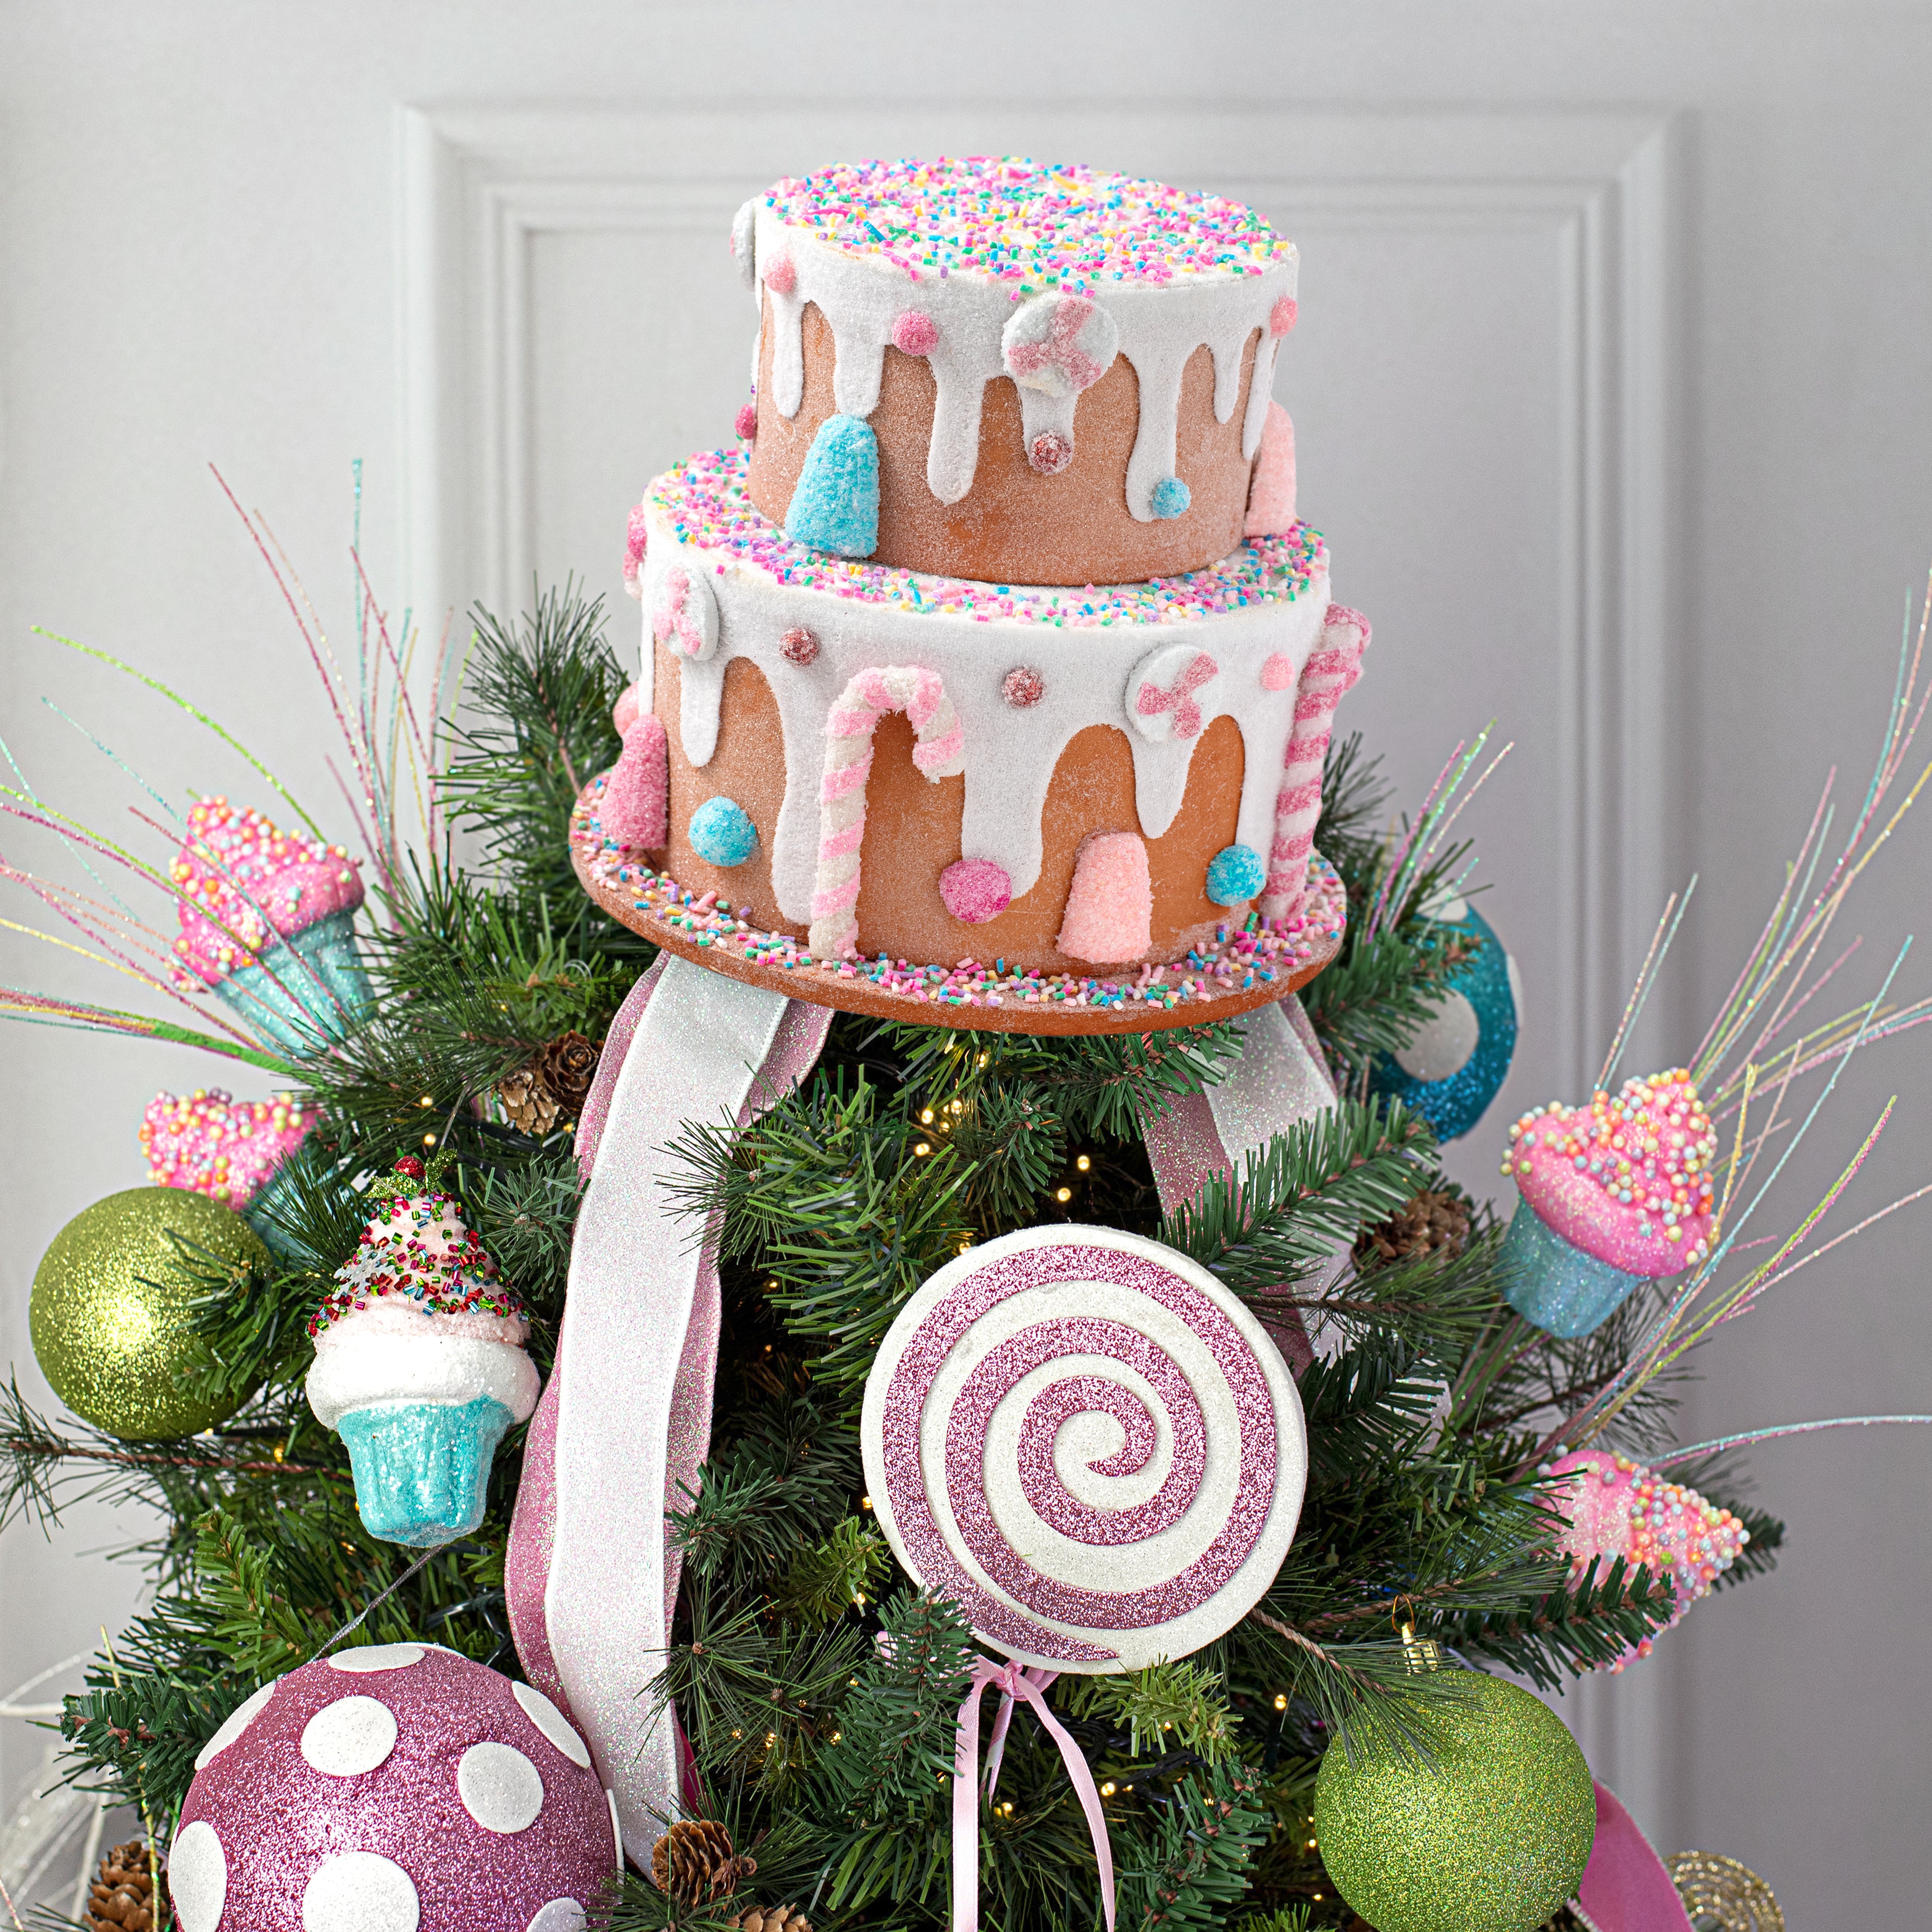 9" 2-Tier Christmas Candy Cake Decoration